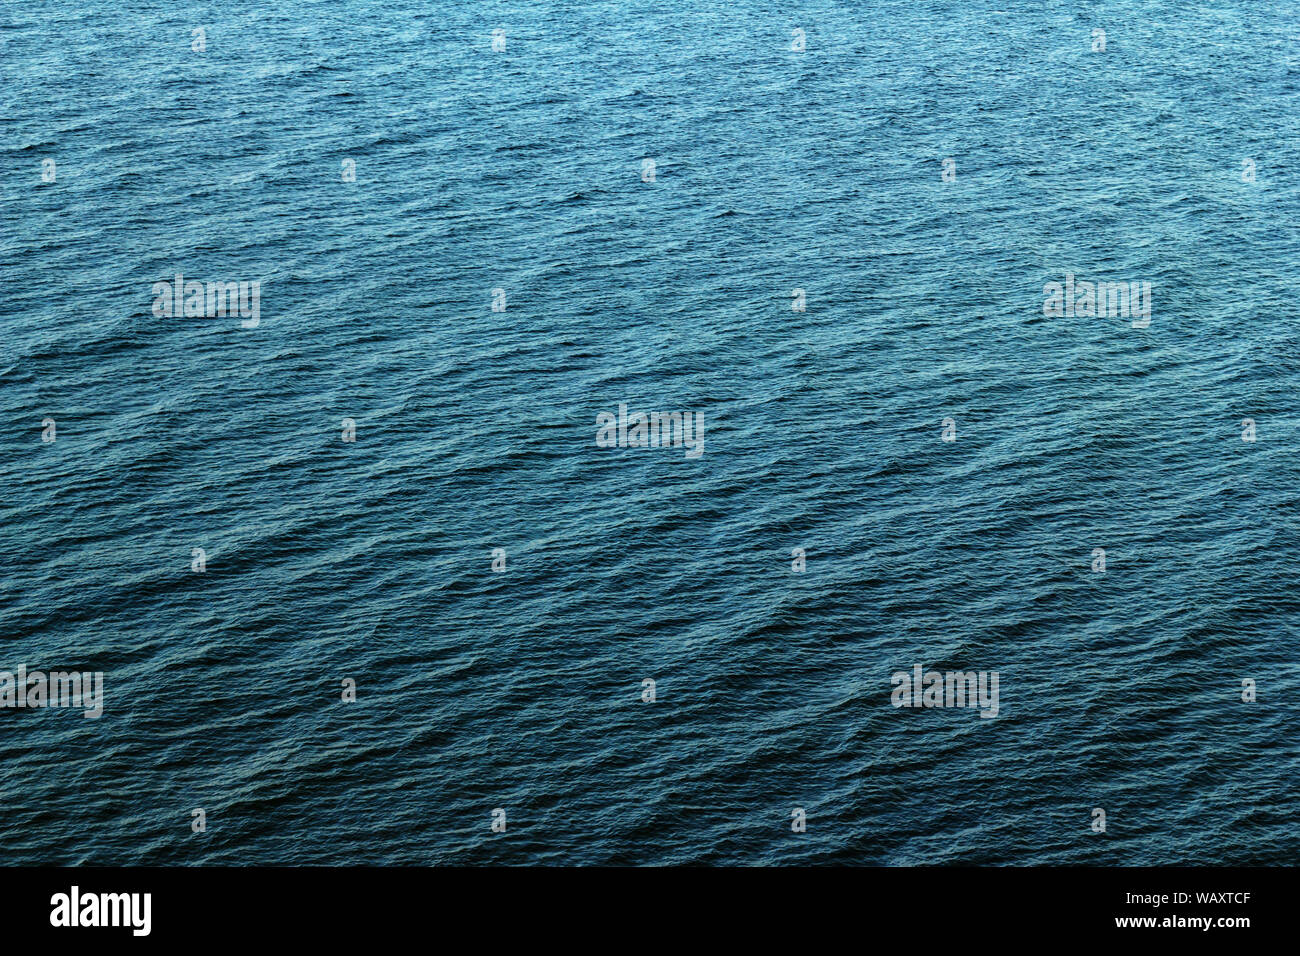 background waves surface blue and moving sea baltic sea bird's eye view Stock Photo